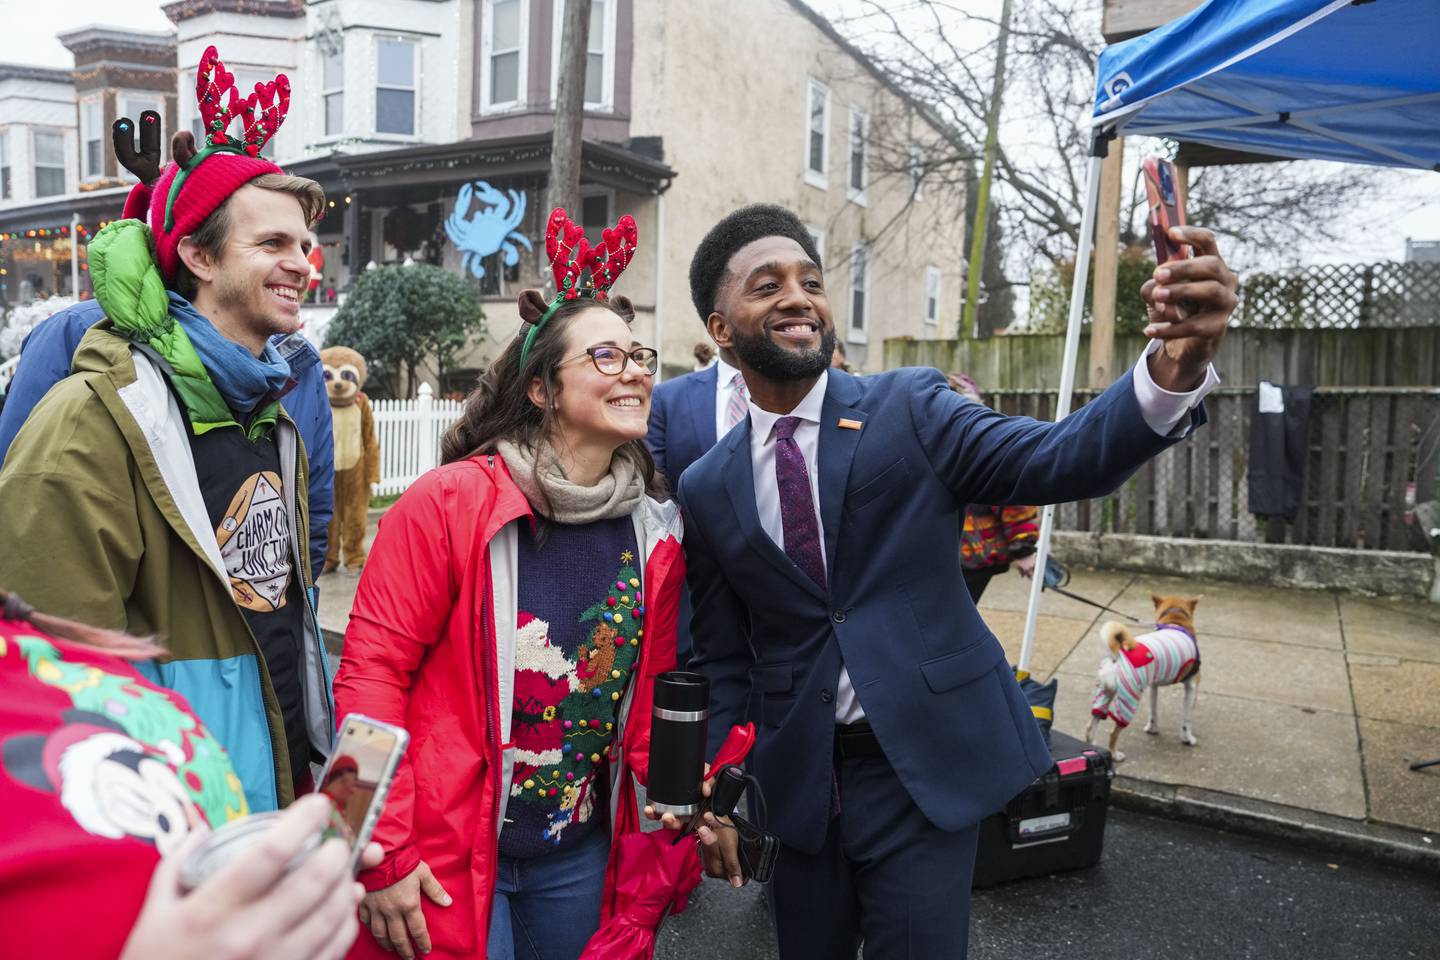 The Today Show filmed a live segment on Hampden's famous 34th street on December 7, 2022.  Mayor Brandon Scott takes selfies with residents and speaks on Baltimore's local gem.